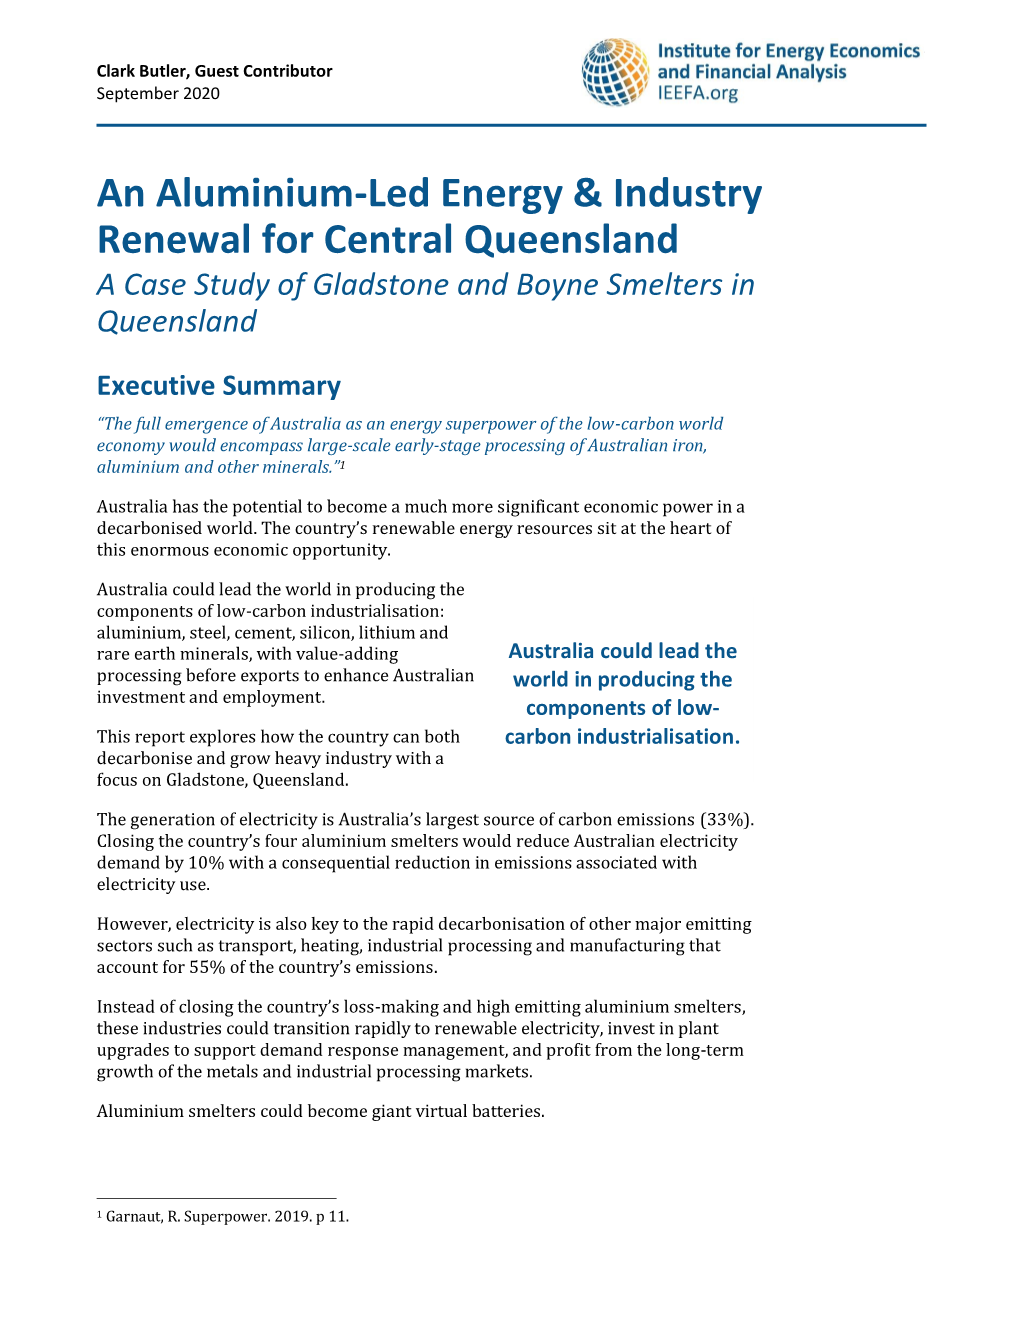 An Aluminium-Led Energy & Industry Renewal for Central Queensland